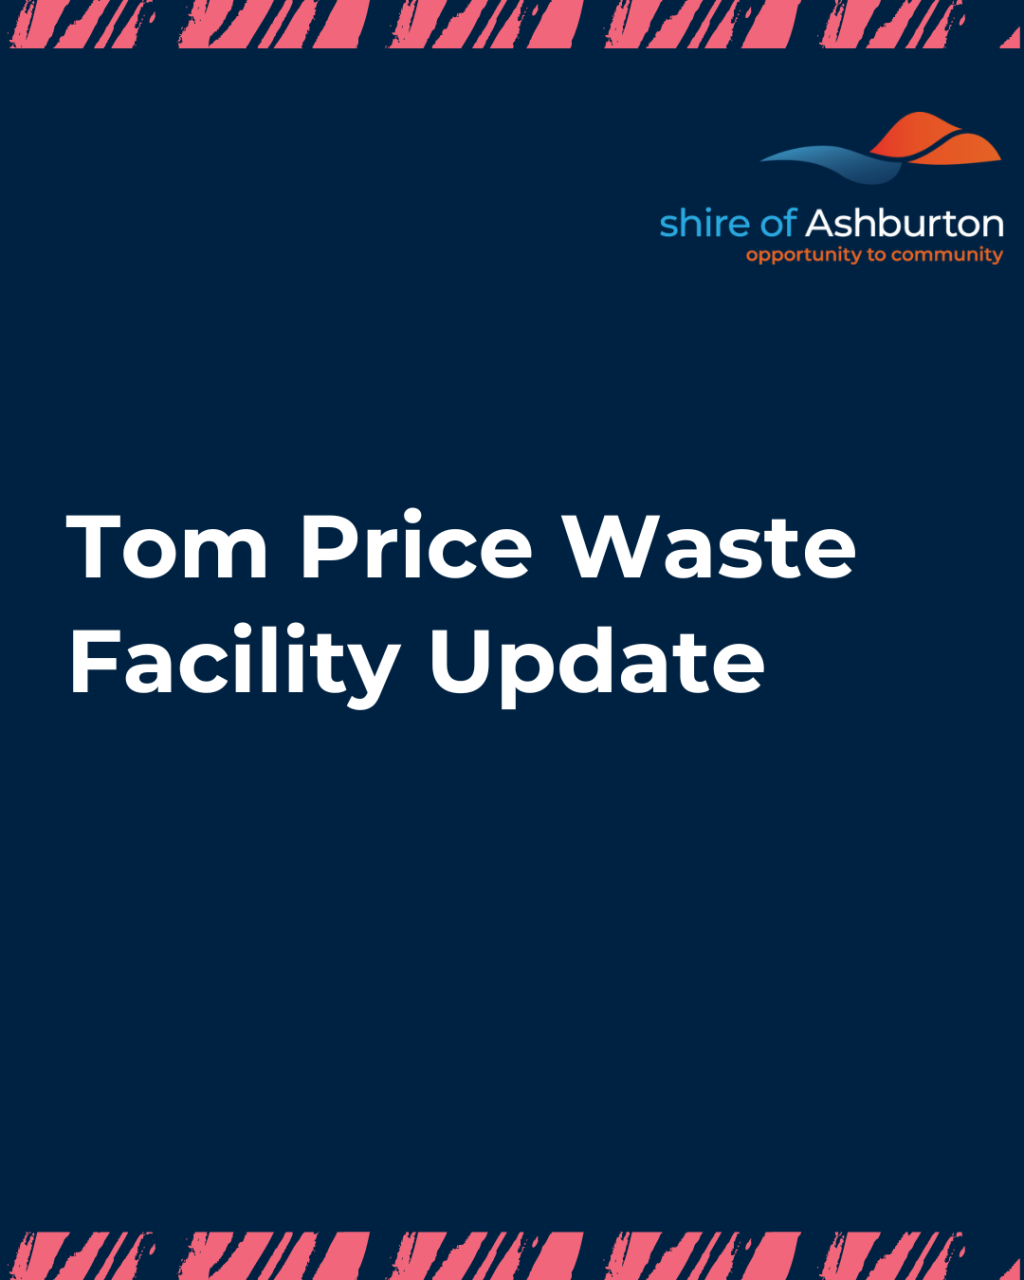 Tom Price Waste Facility Update